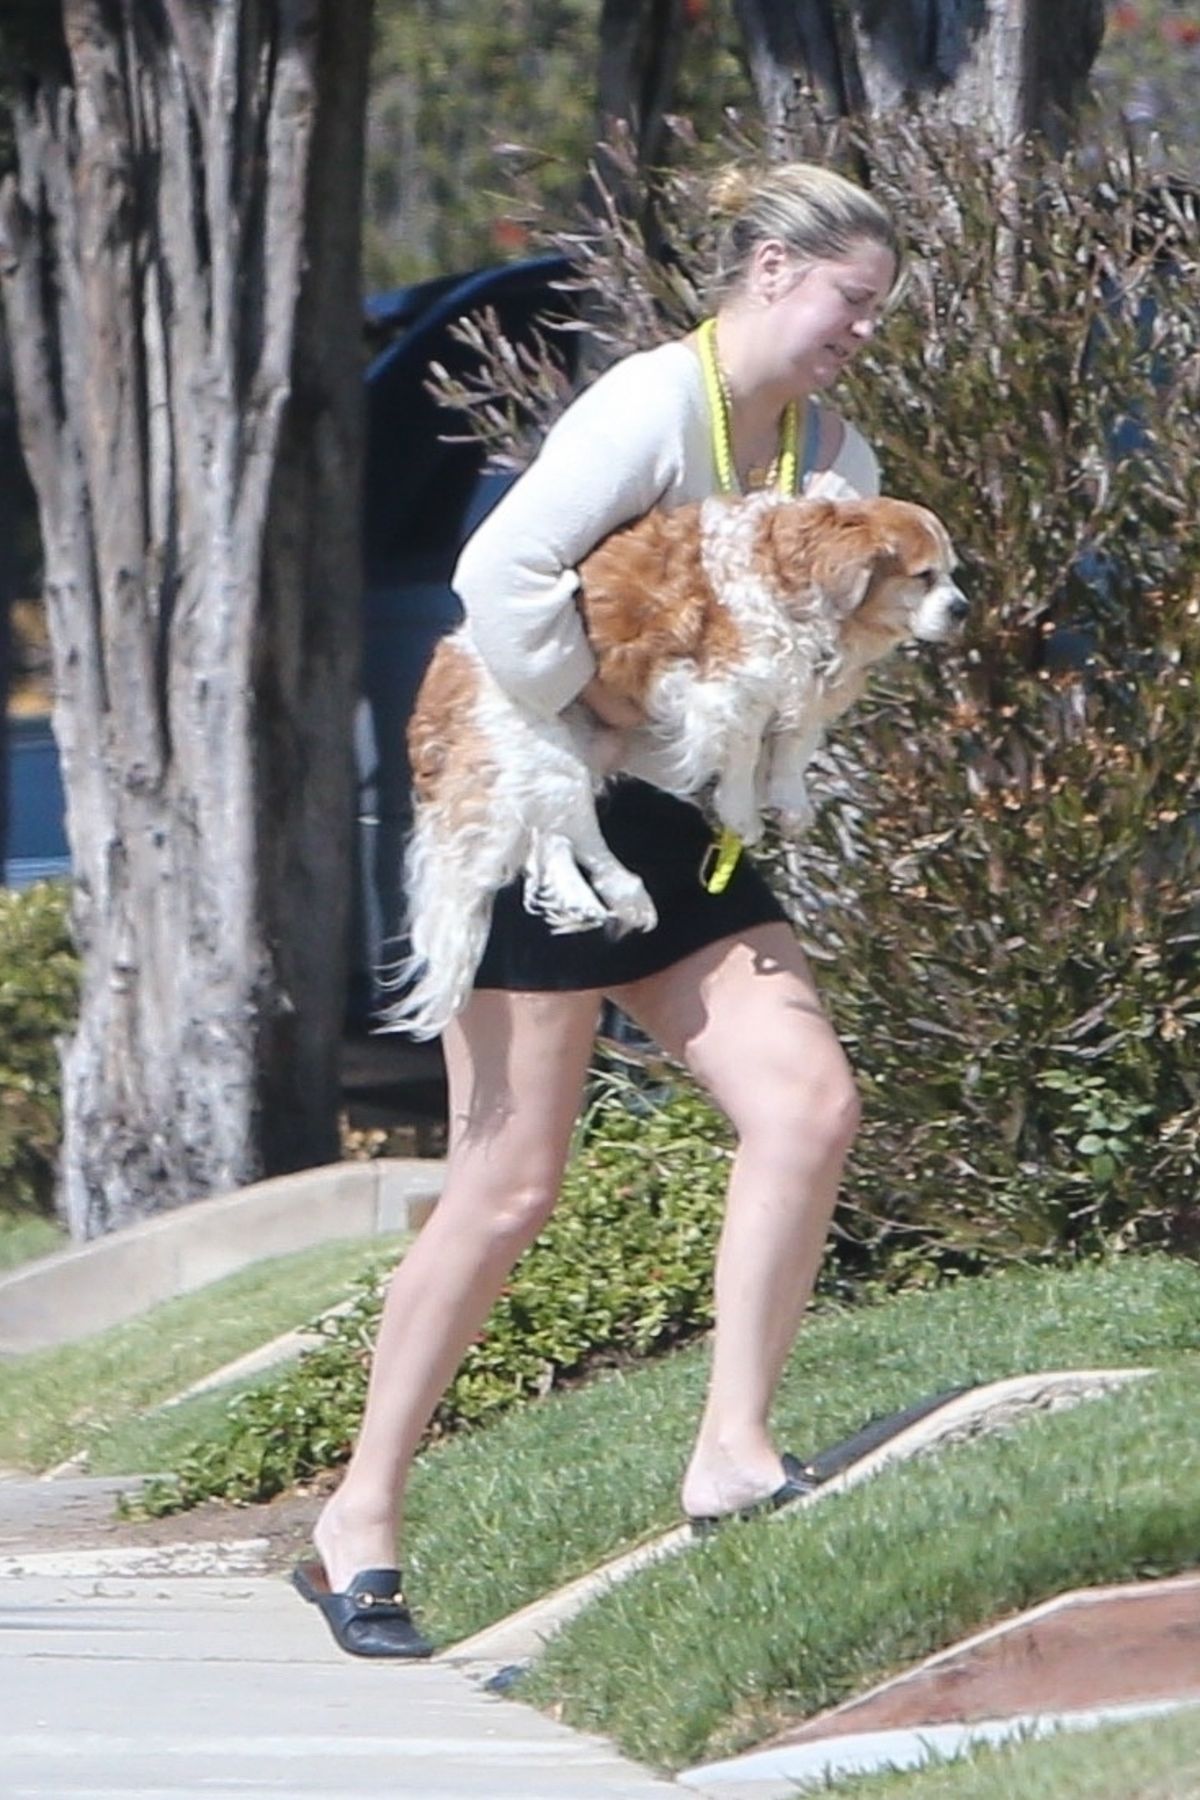 mischa-barton-with-her-dog-outside-her-home-in-los-angeles-09-25-2020-3.jpg